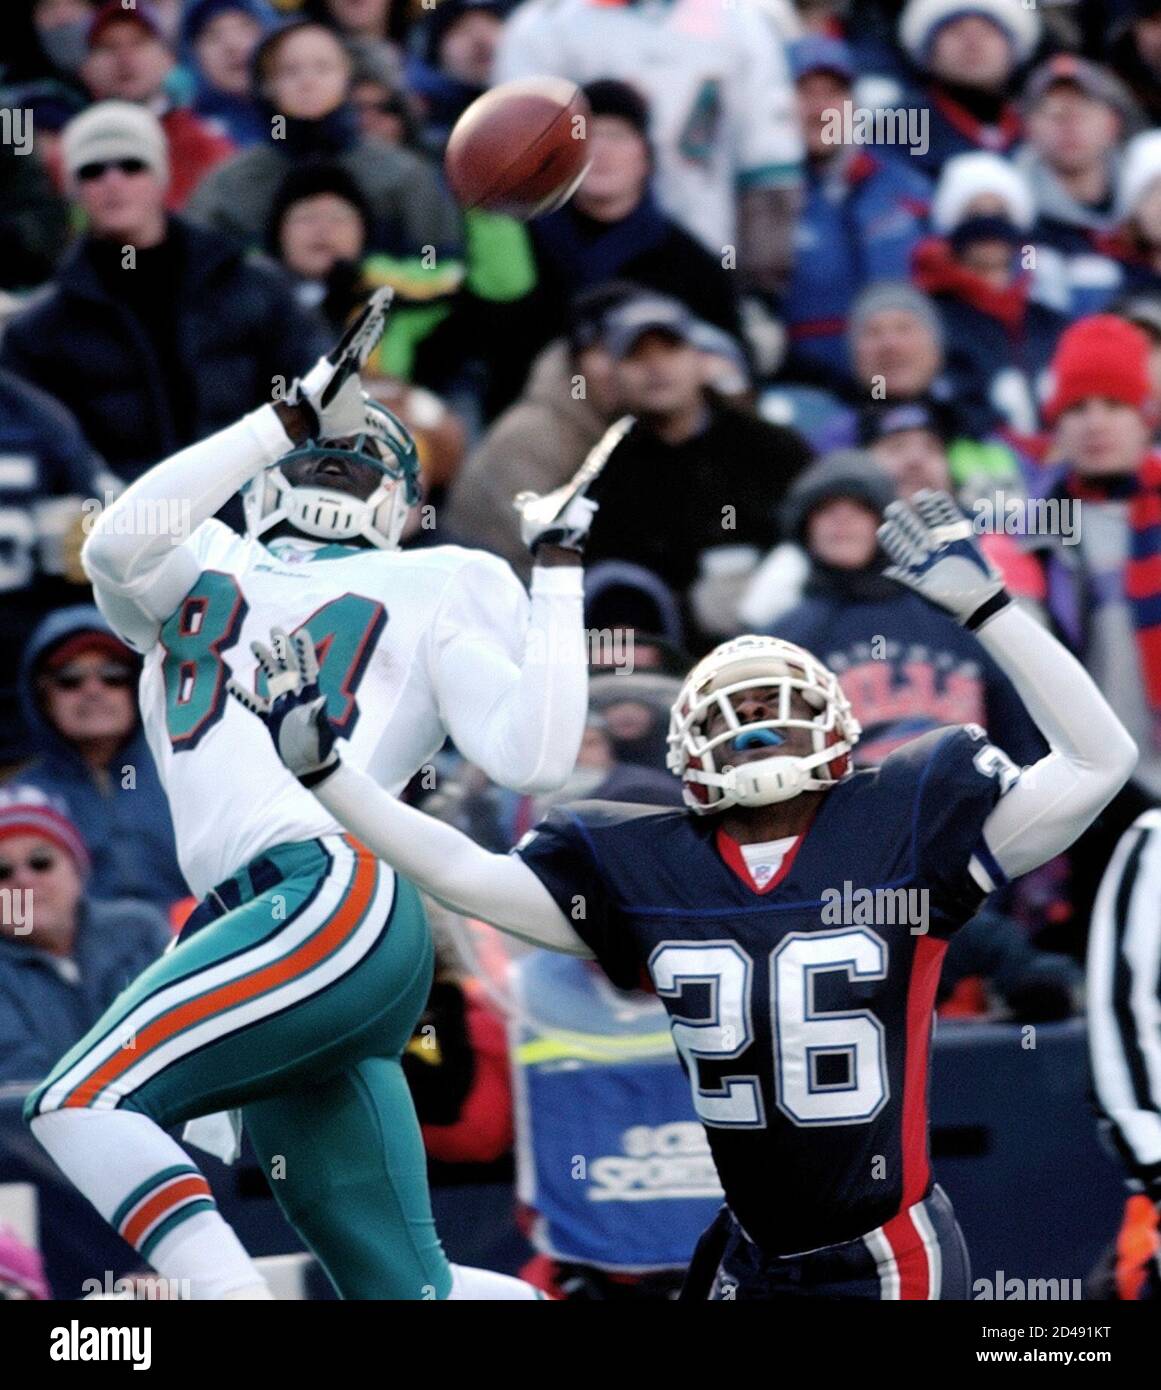 miami-dolphins-wide-receiver-chris-chambers-84-makes-a-leaping-catch-for-a-touchdown-as-buffalo-bills-cornerback-antoine-winfield-26-tries-to-block-the-pass-at-ralph-wilson-stadium-in-orchard-park-new-york-december-21-2003-the-touchdown-came-off-a-23-yard-pass-from-miami-quarterback-jay-fiedler-reutersgary-wiepert-bmgac-2D491KT.jpg